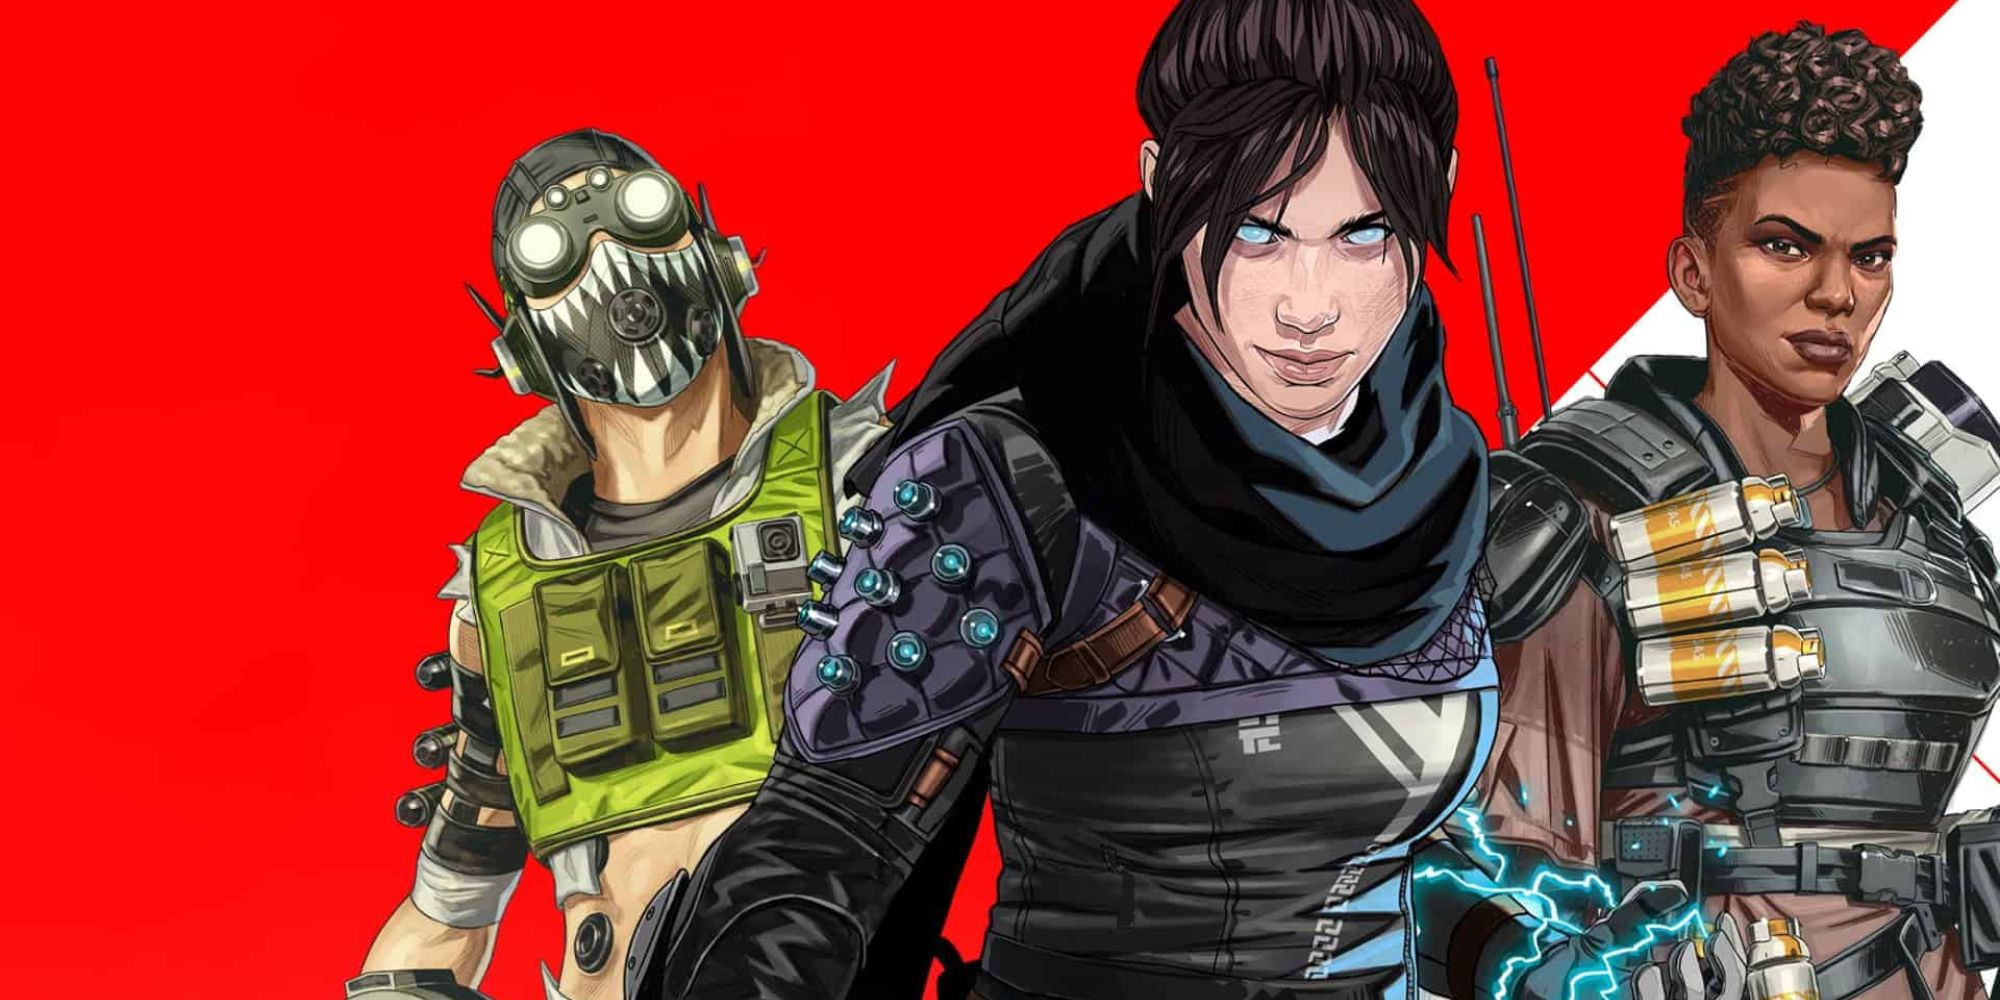 Octane, Wraith, and Bangalore from Apex Legends